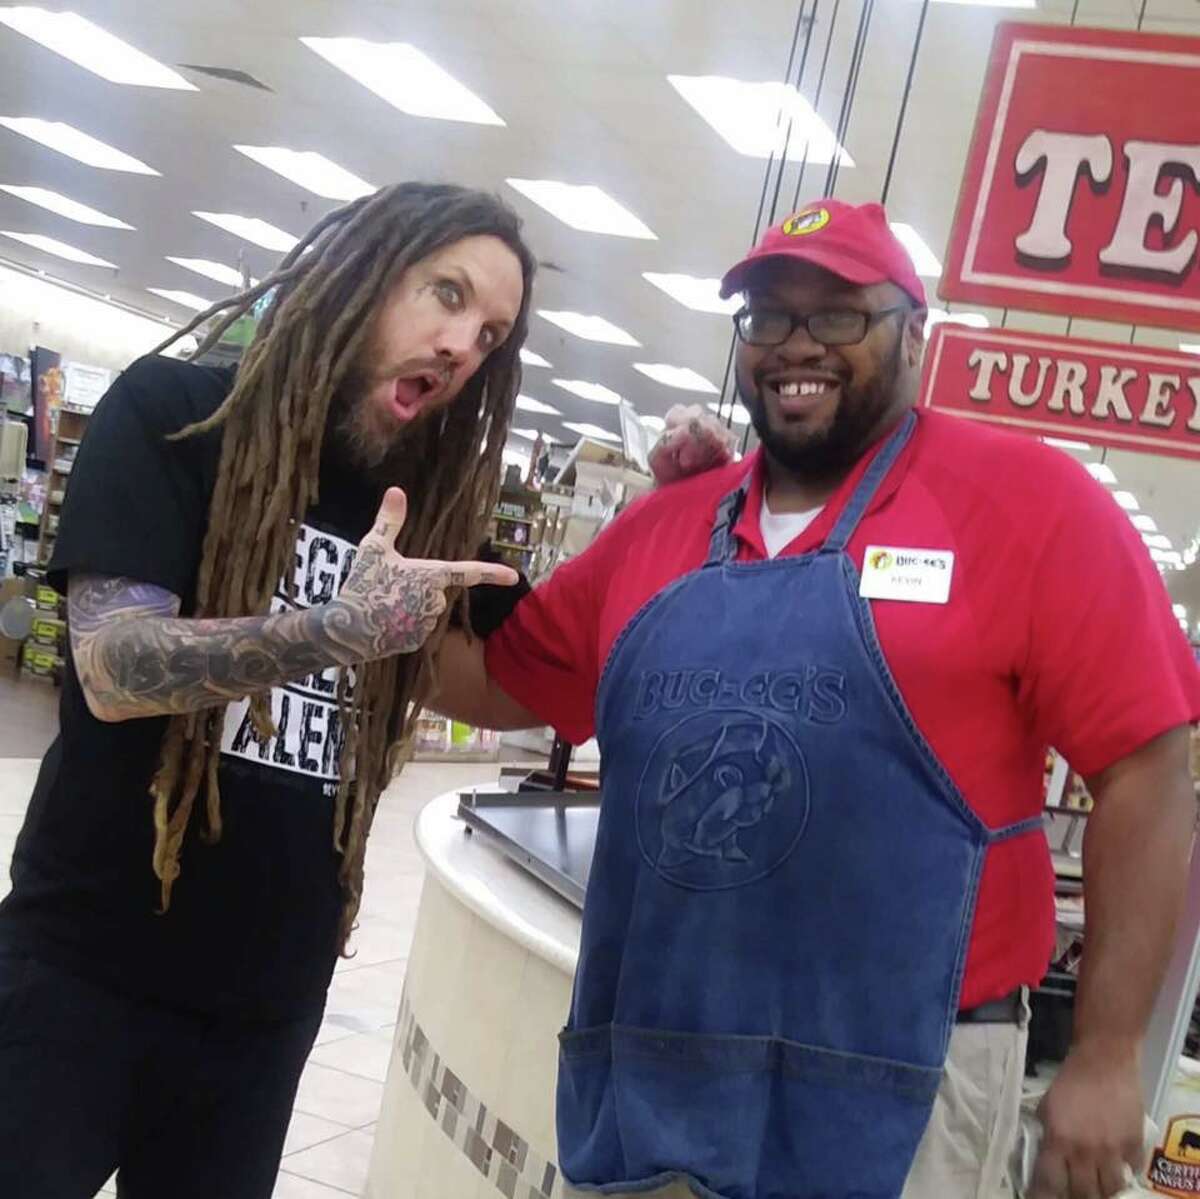 Brian "Head" Welch  The lead guitarist of the band Korn is the most recent celebrity sighting at Buc-ee's. He was spotted at a Terrell, Texas location in late July of 2019.  >>>Check out which other notable celebrities have made at least one pit stop at Buc-ee's.